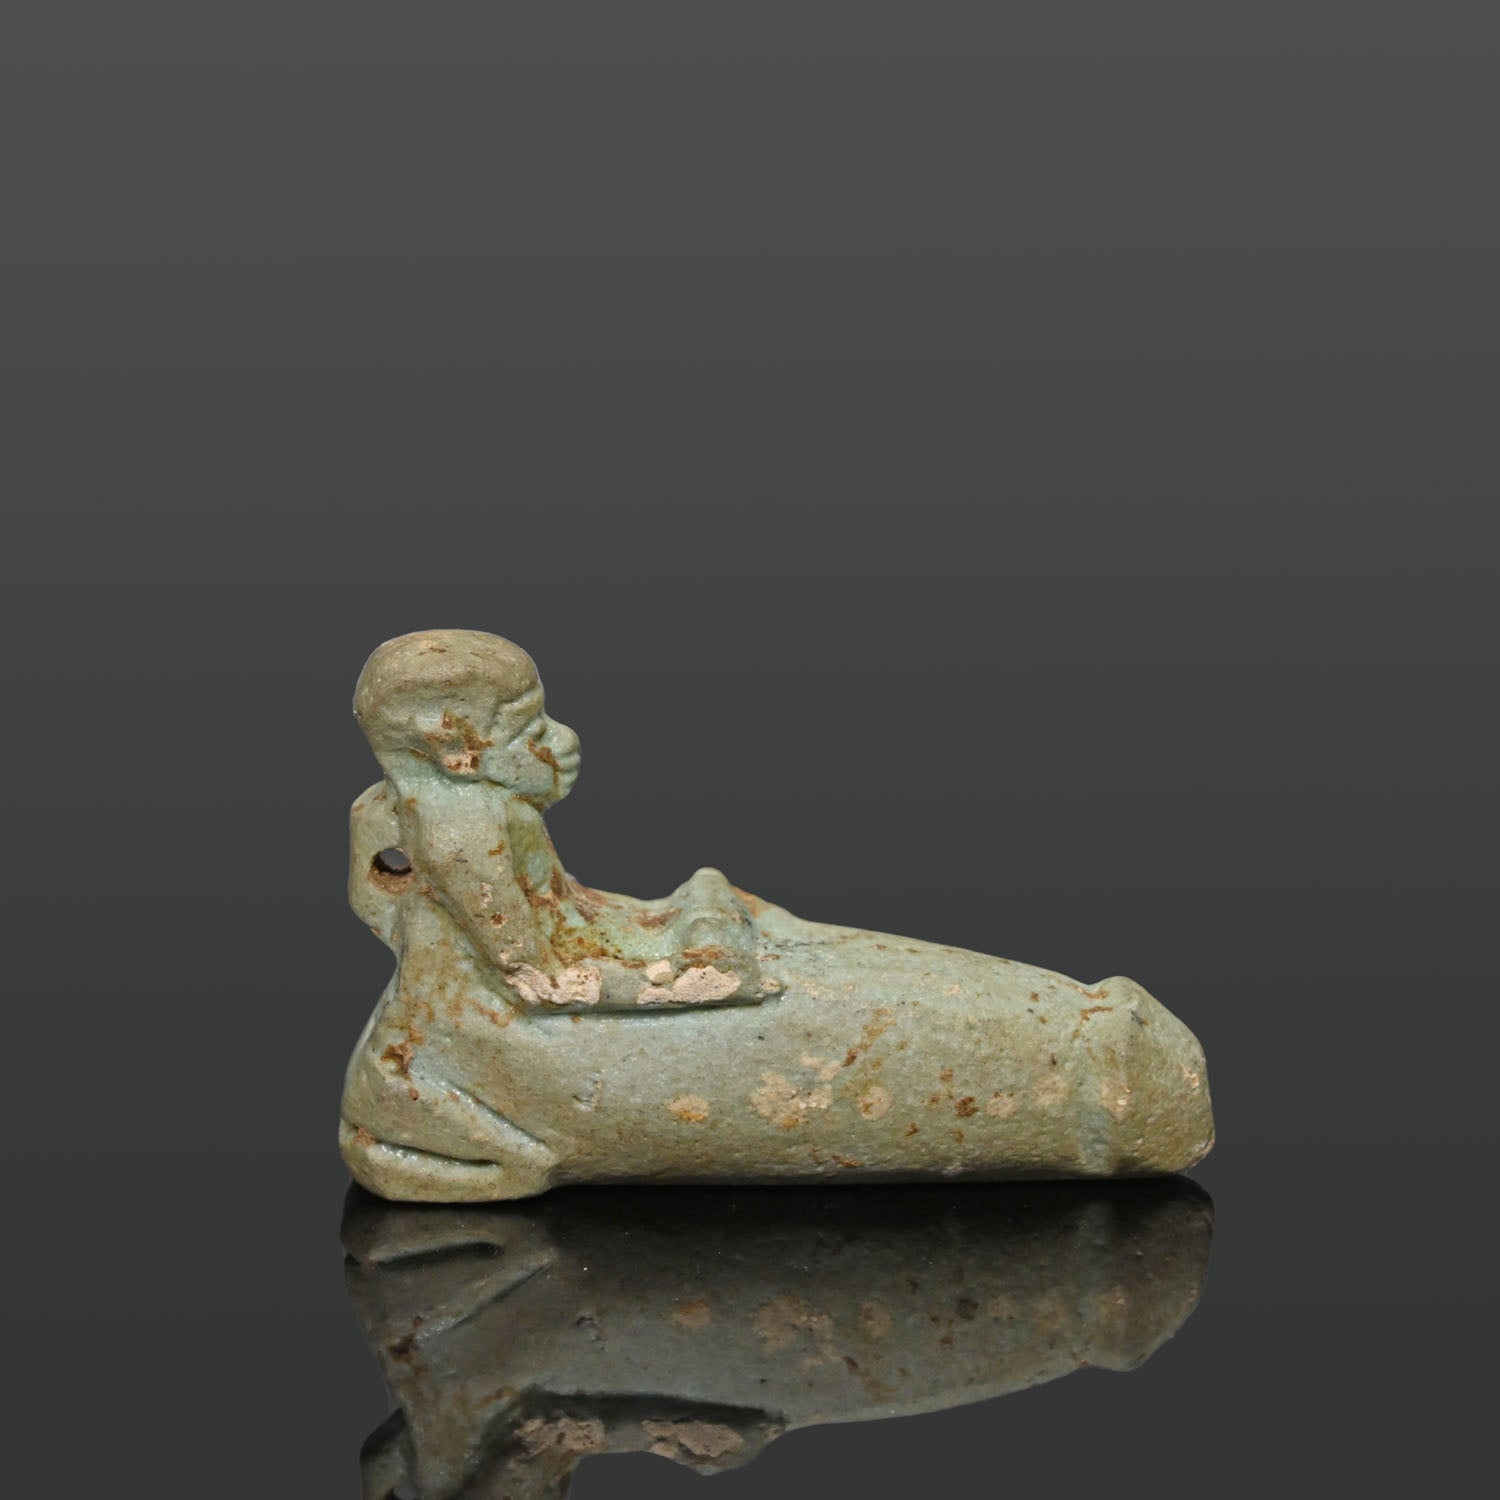 A large Egyptian Faience Ithyphallic Amulet, Late Period, ca. 664 - 332 BCE